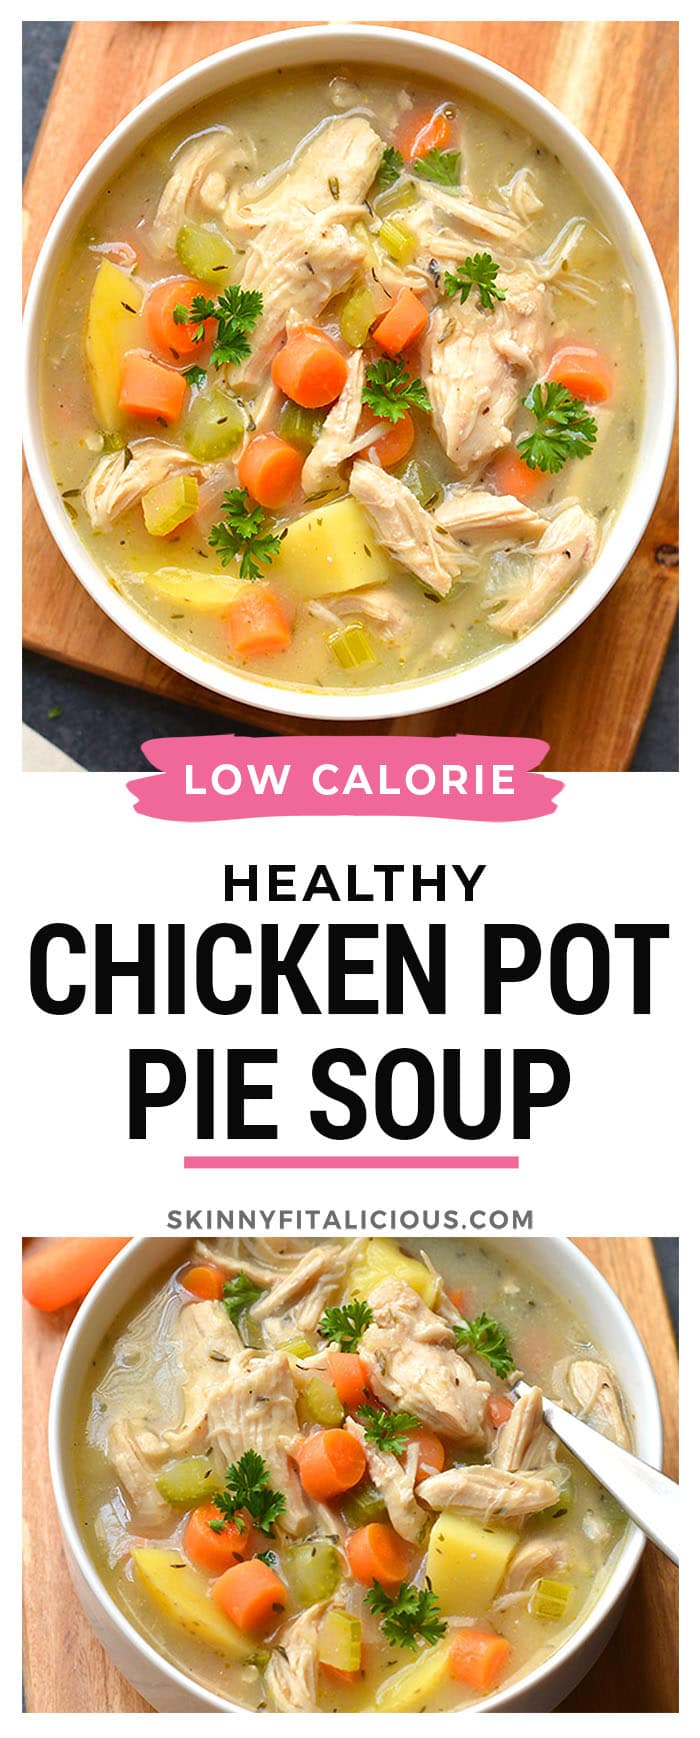 Healthy Chicken Pot Pie Soup is a low calorie soup recipe made without cream or dairy. A lighter chicken pot pie recipe that's delicious and gluten free! Low Calorie + Gluten Free + Paleo